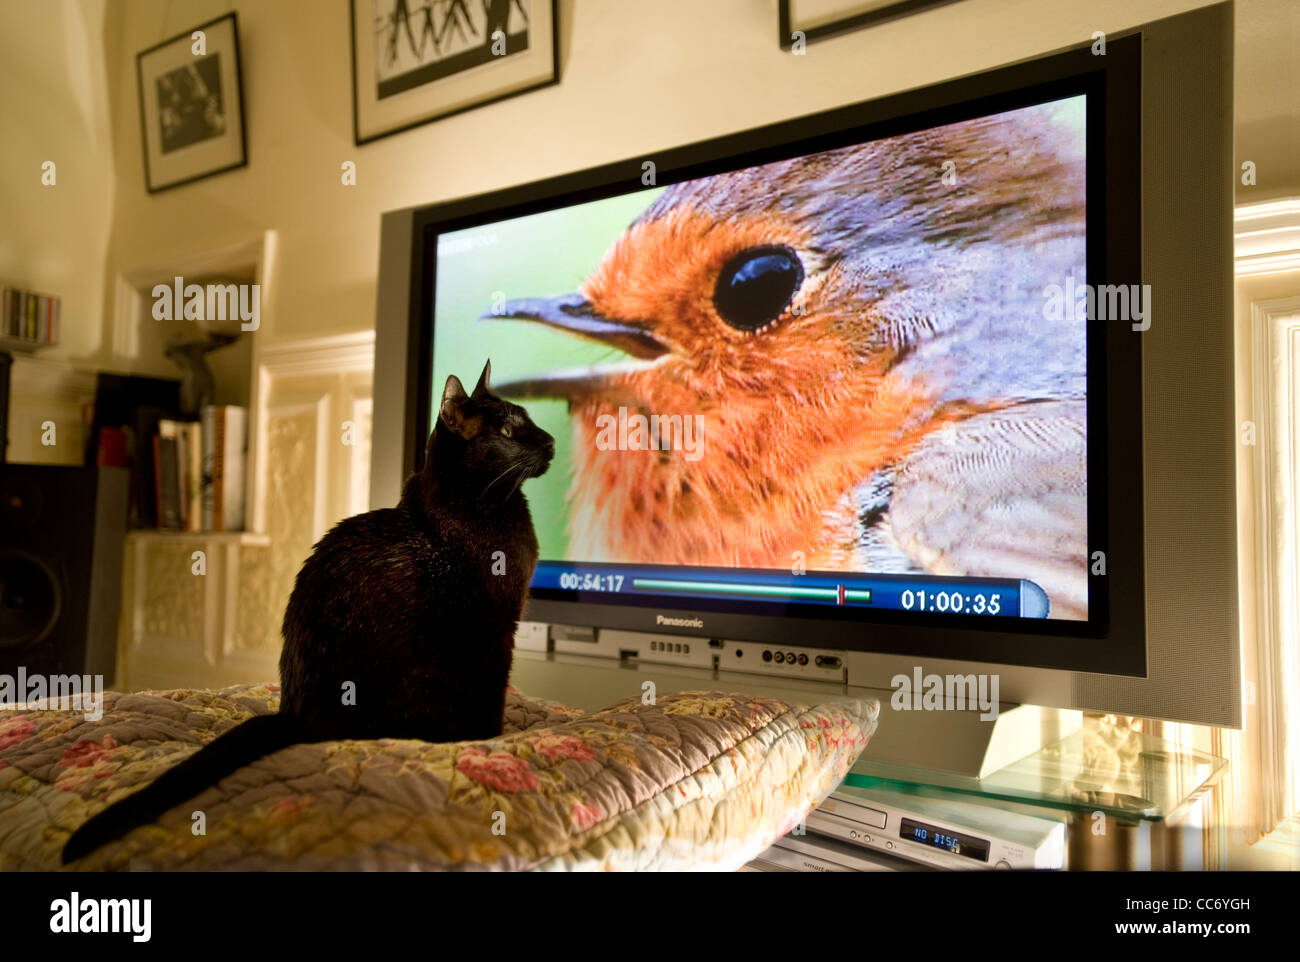 Black cat watching a tv programme about birds, robin on television screen. Stock Photo